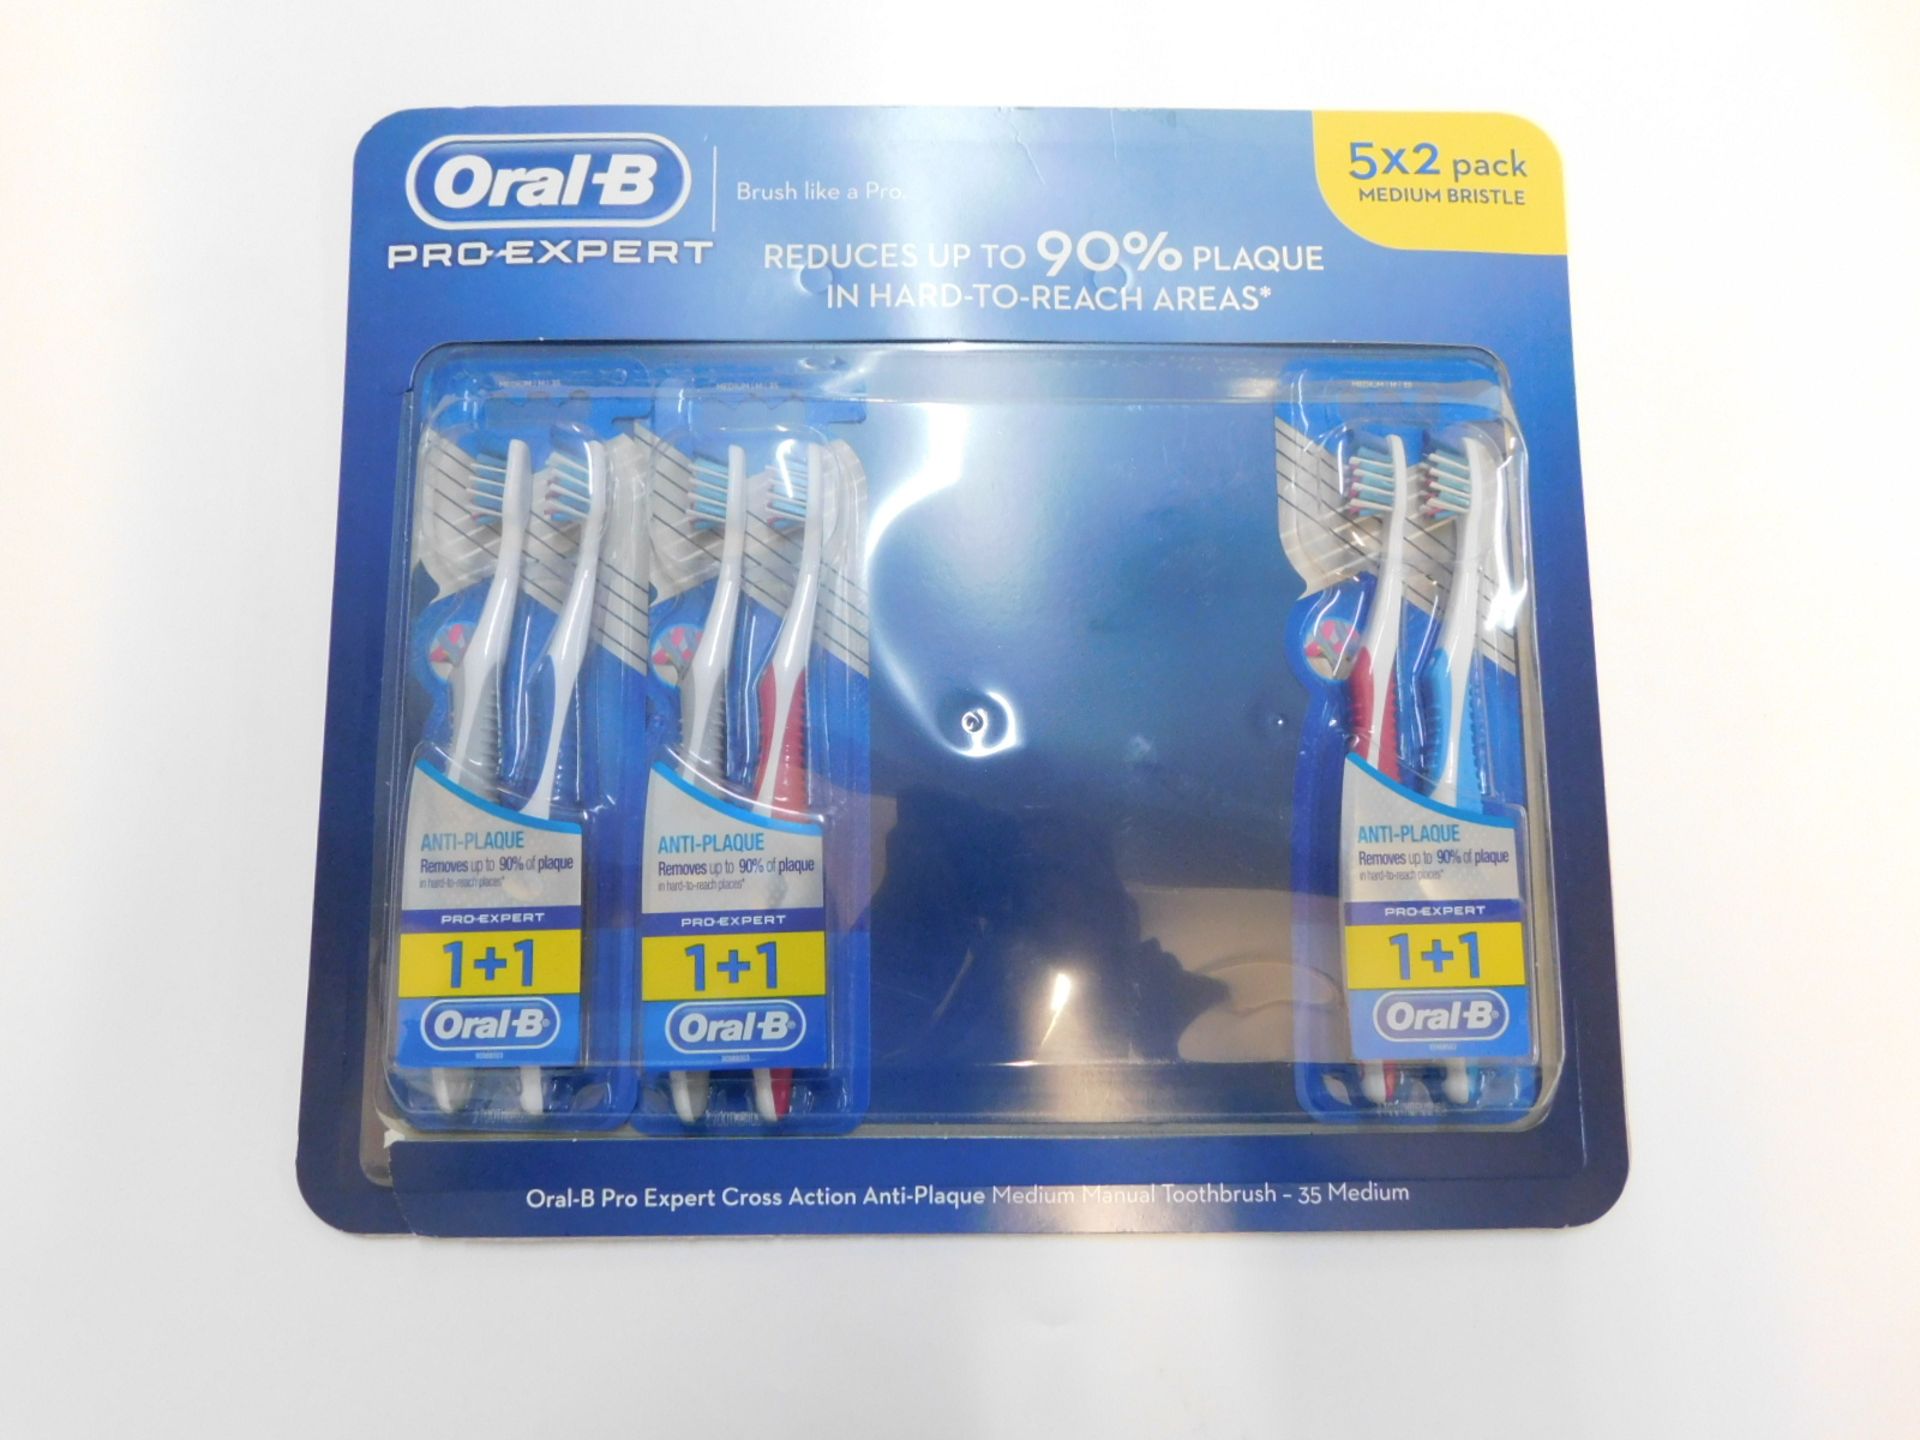 1 PACK OF 6 ORAL-B CROSS ACTION TOOTHBRUSHES RRP £29.99